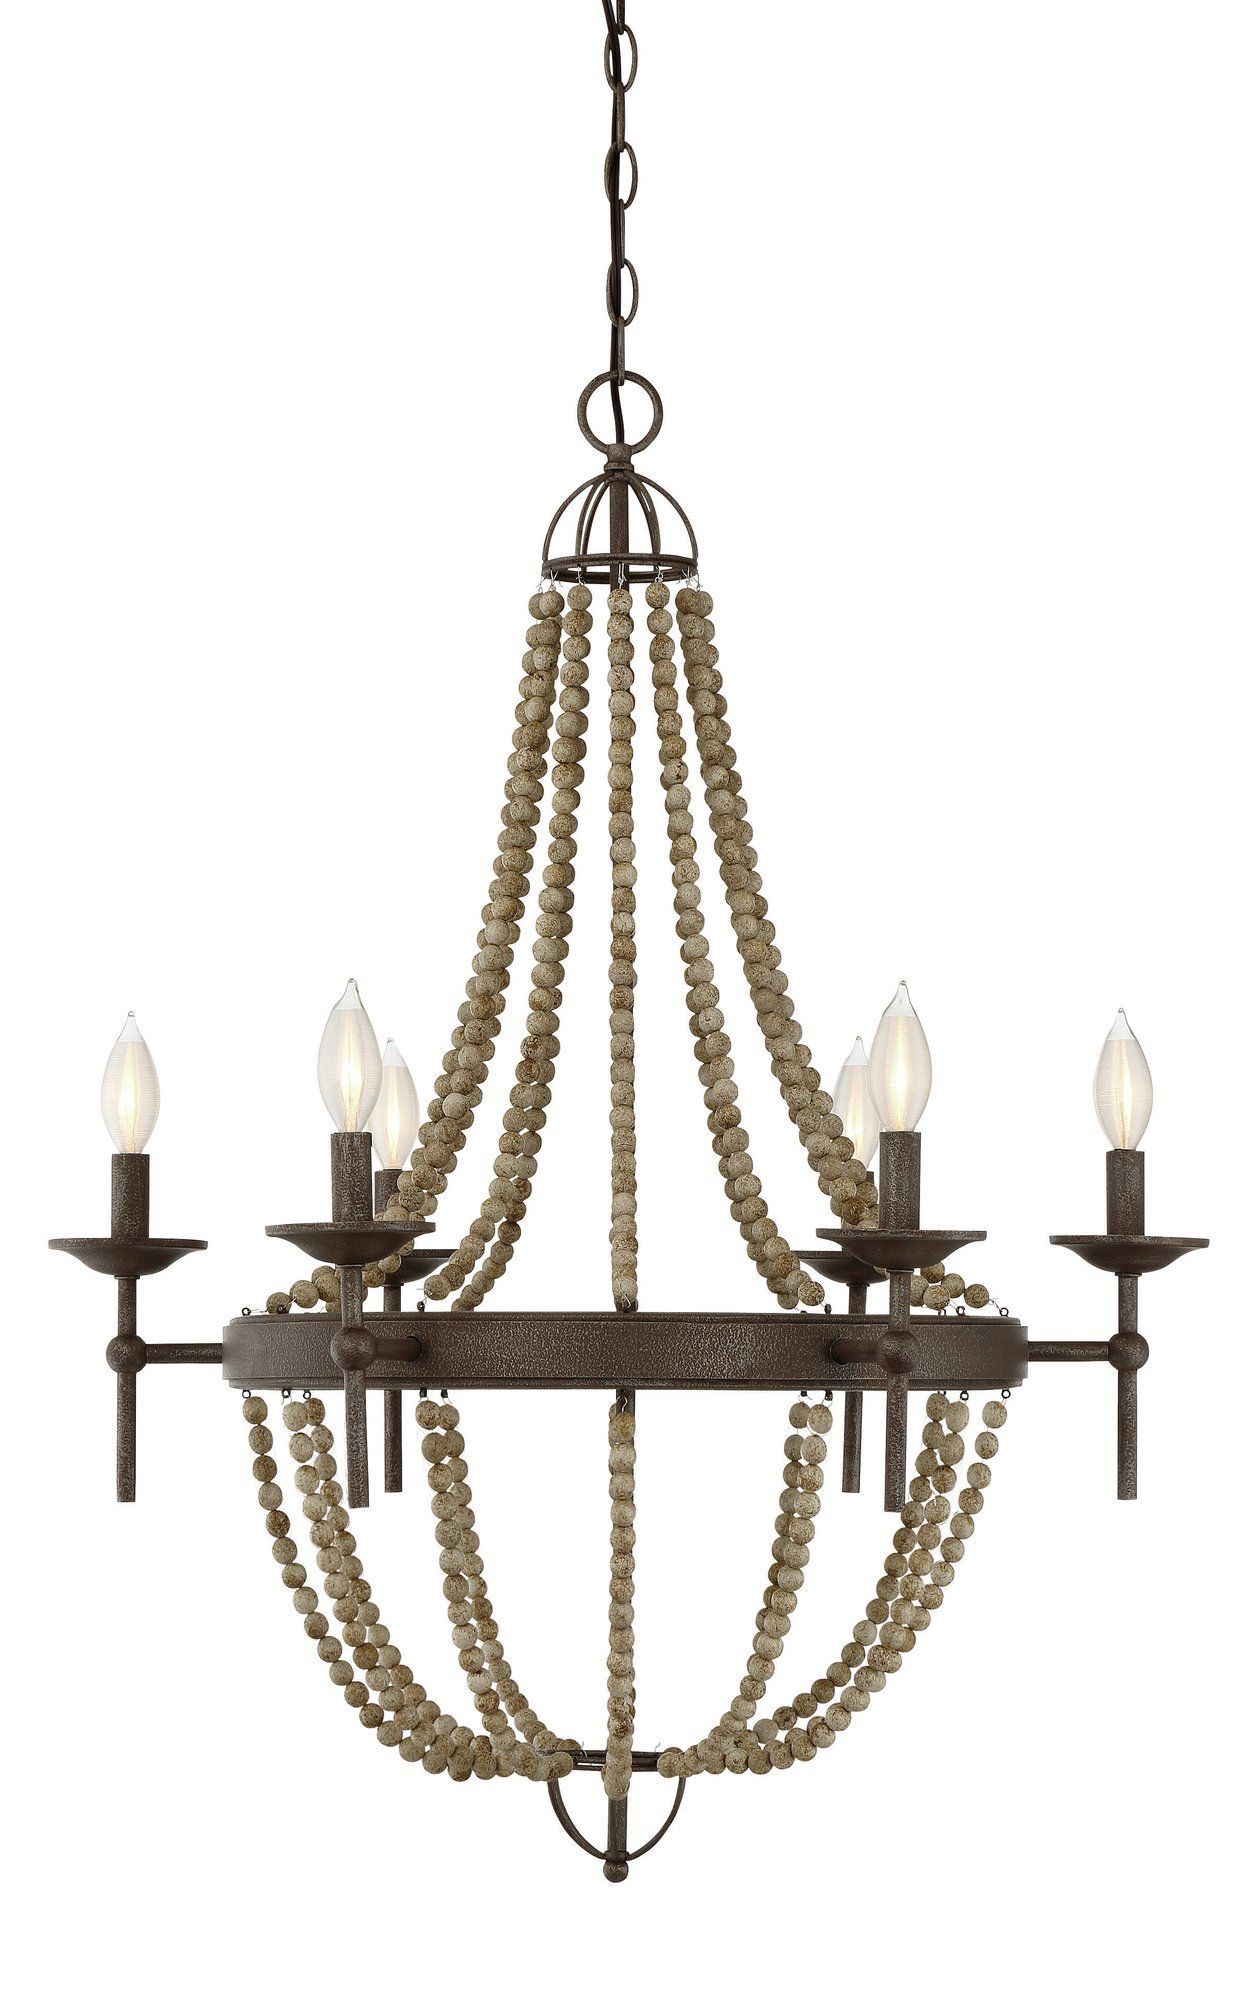 Pennington 6 Light Empire Chandelier | Products | Chandelier With Regard To Nehemiah 3 Light Empire Chandeliers (View 18 of 30)